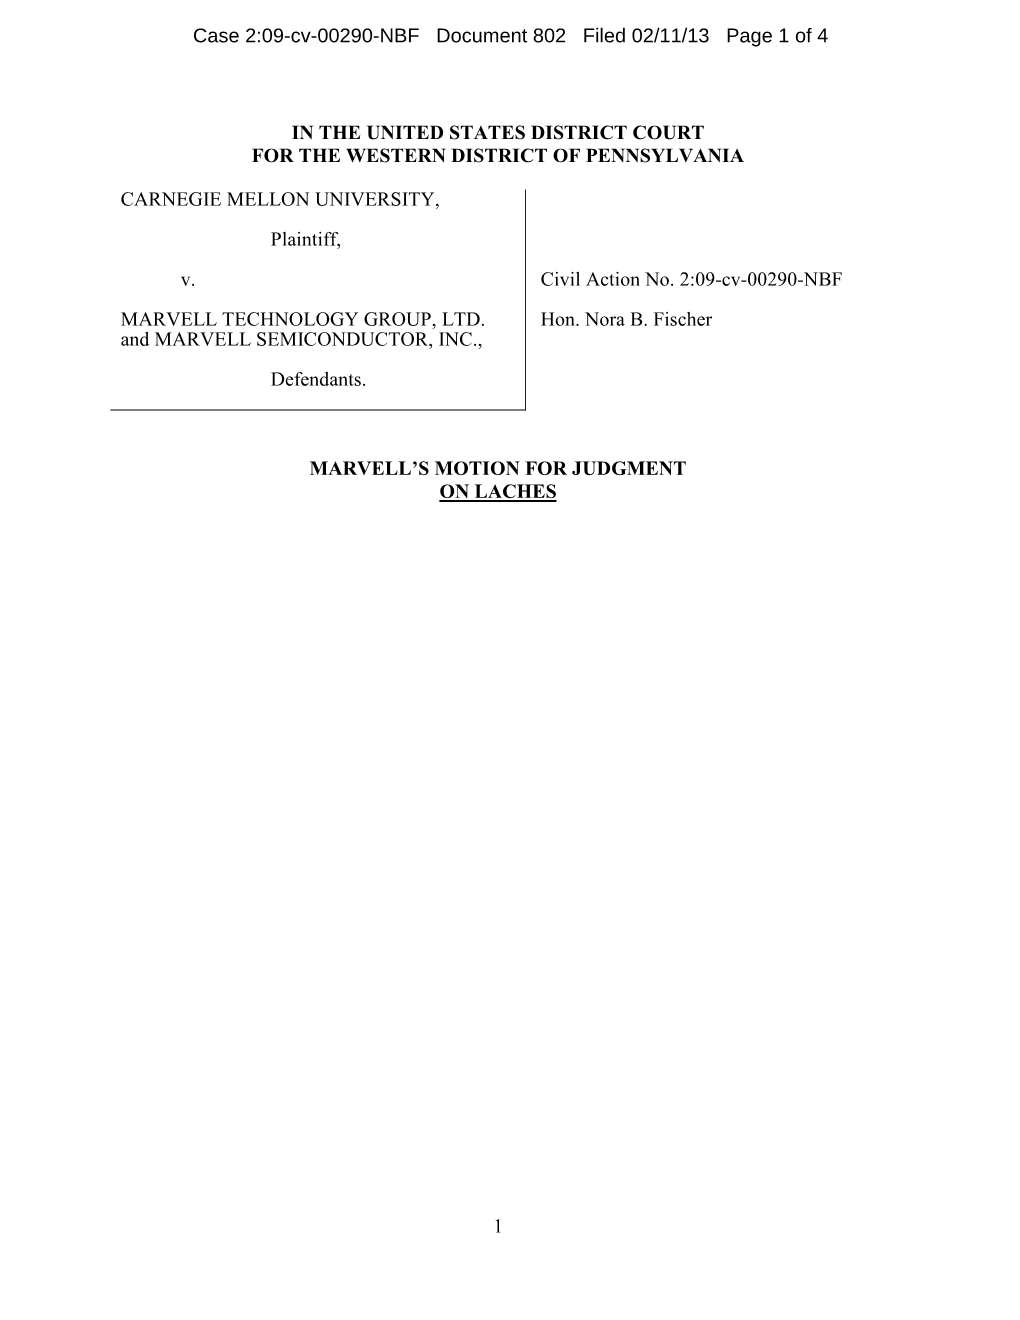 Marvell Files a Motion, [.Pdf]